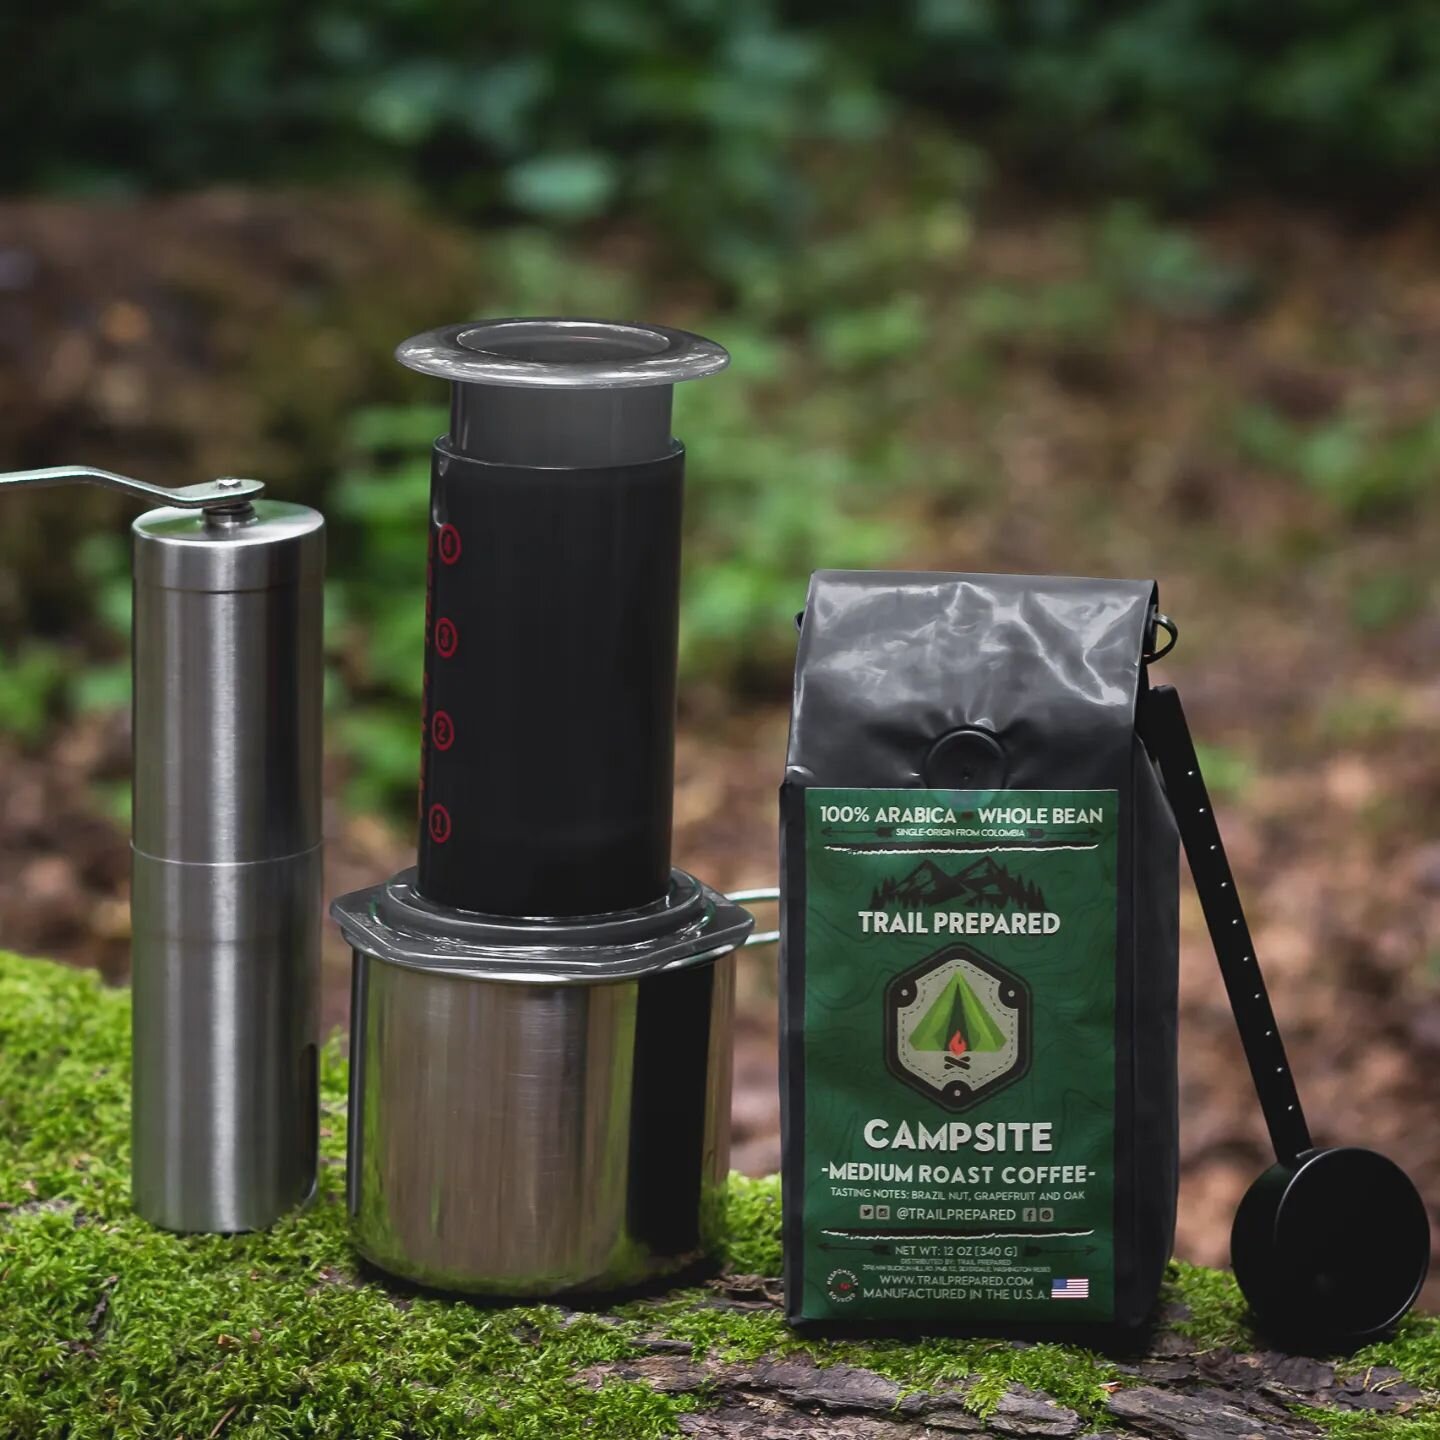 Our Campsite Coffee is BACK IN STOCK!!! ☕🔥🙌 Grab a bag of our customer favorite today, before it's all gone! Very limited quantities!
-
-
-
-
-
#TrailPrepared #YouBelongOutdoors #Campsite #CampsiteCoffee #BackInStock #Coffee #WholeBean #Arabica #Si